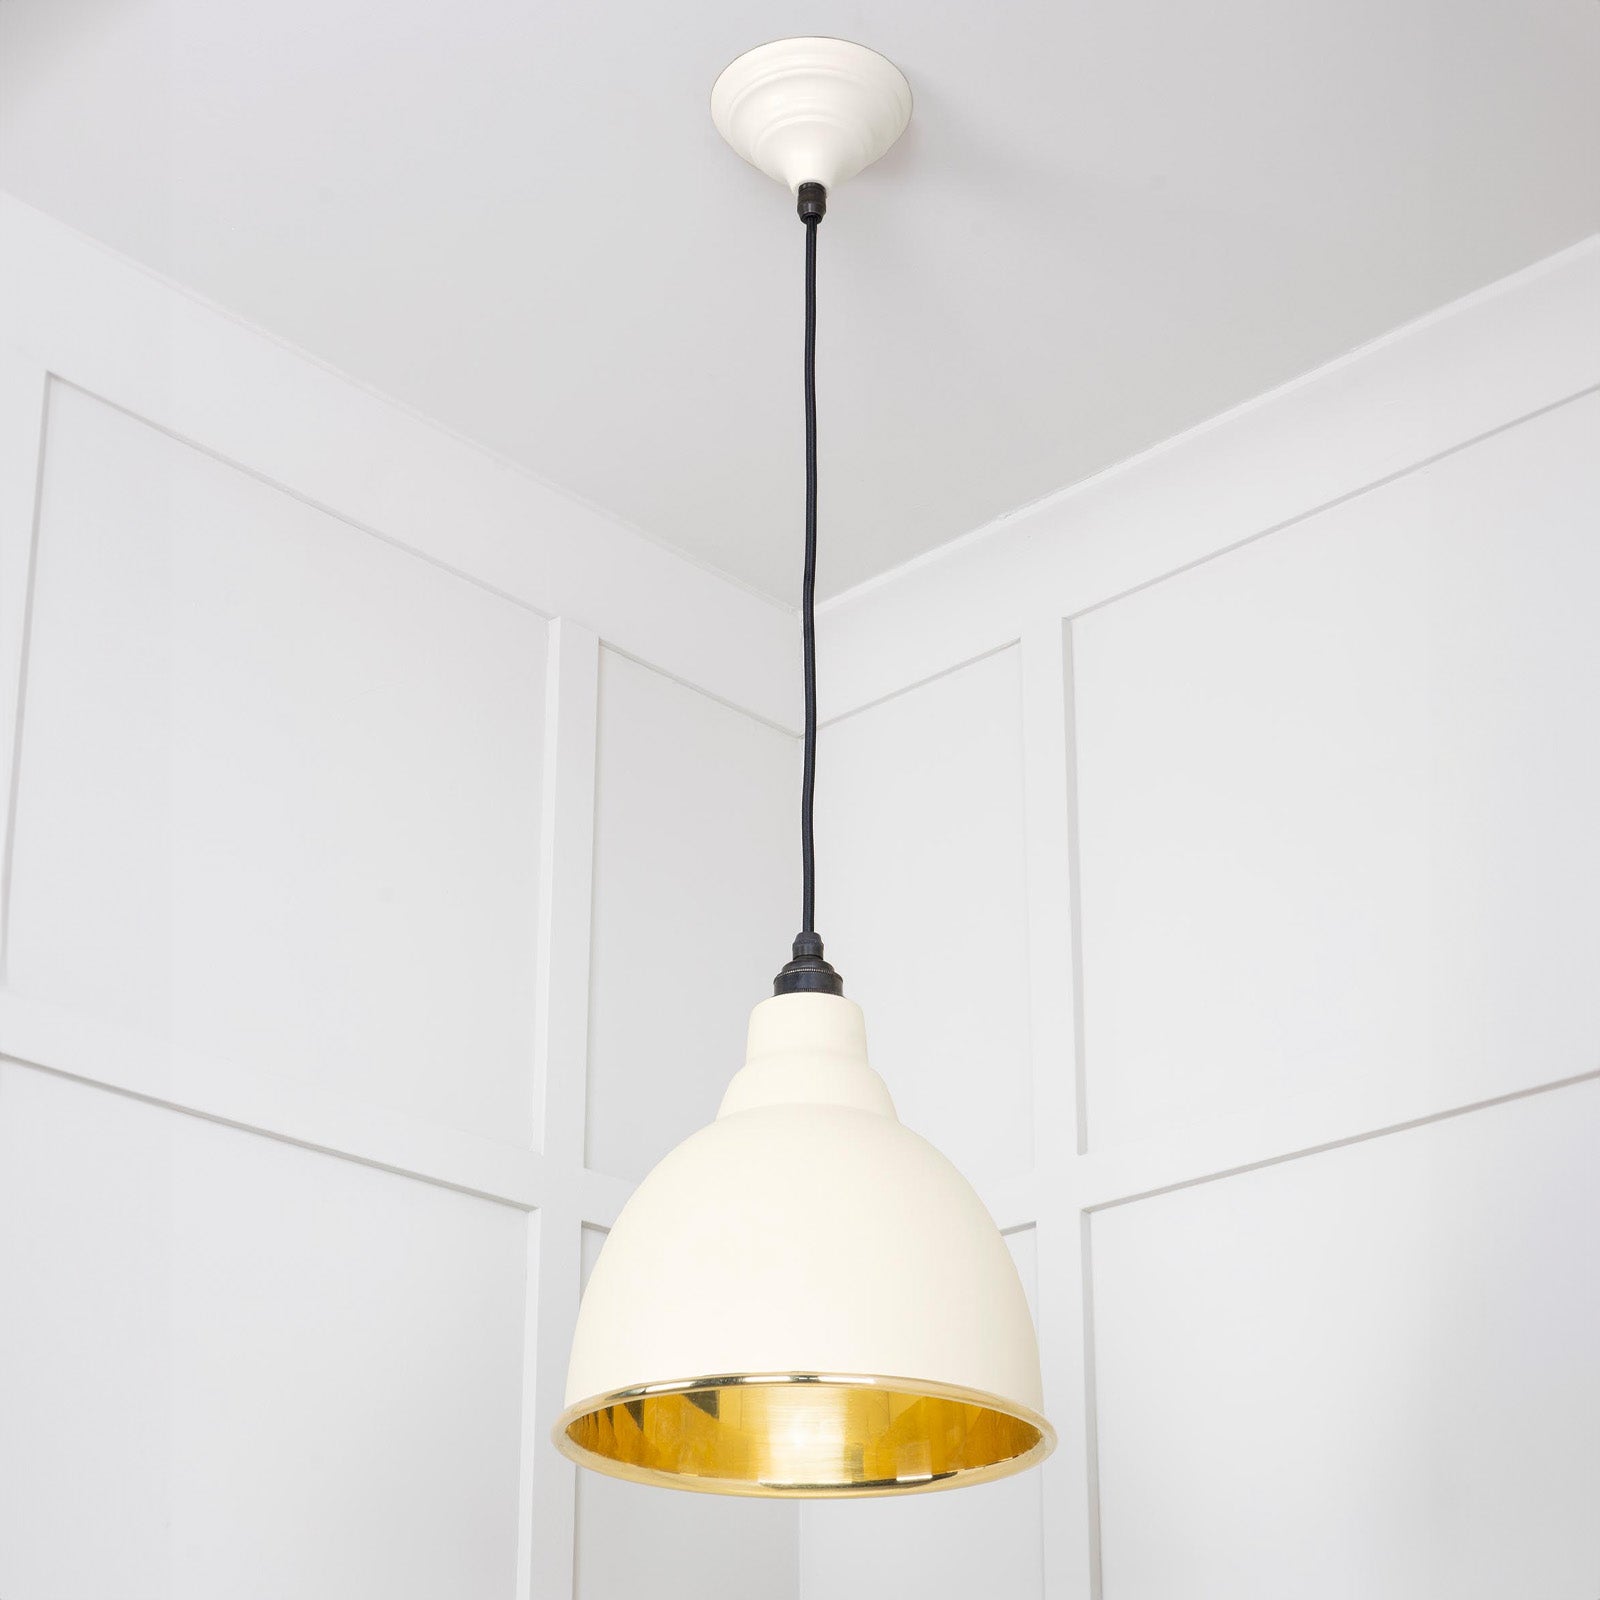 SHOW Full Image of Hanging Brindley Ceiling Light in Teasel